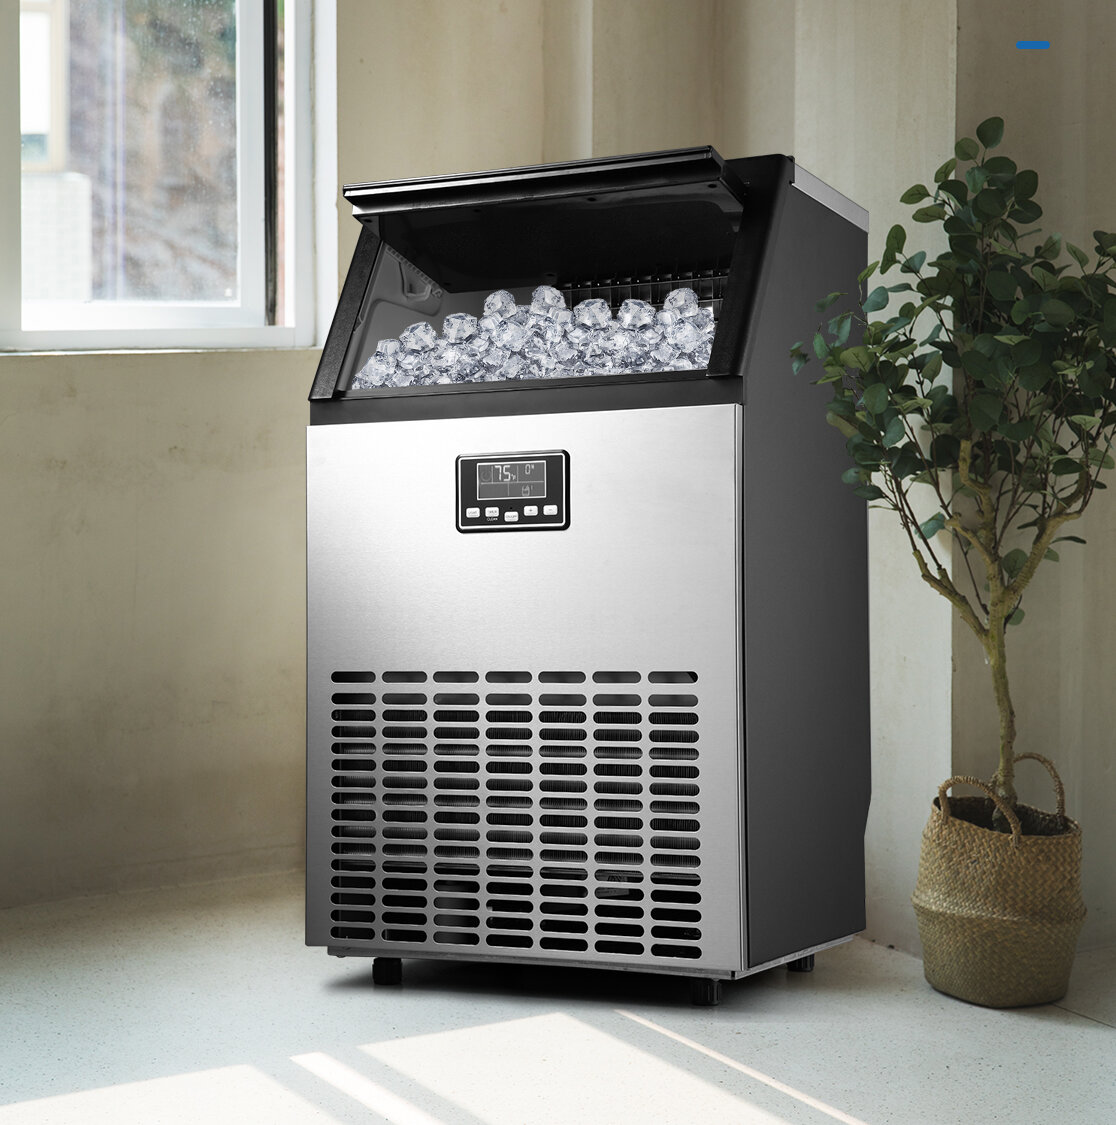 ADT Commercial Ice Maker Stainless Steel Industrial Modular ETL Approved Professional Refrigeration Equipment 270LBS 